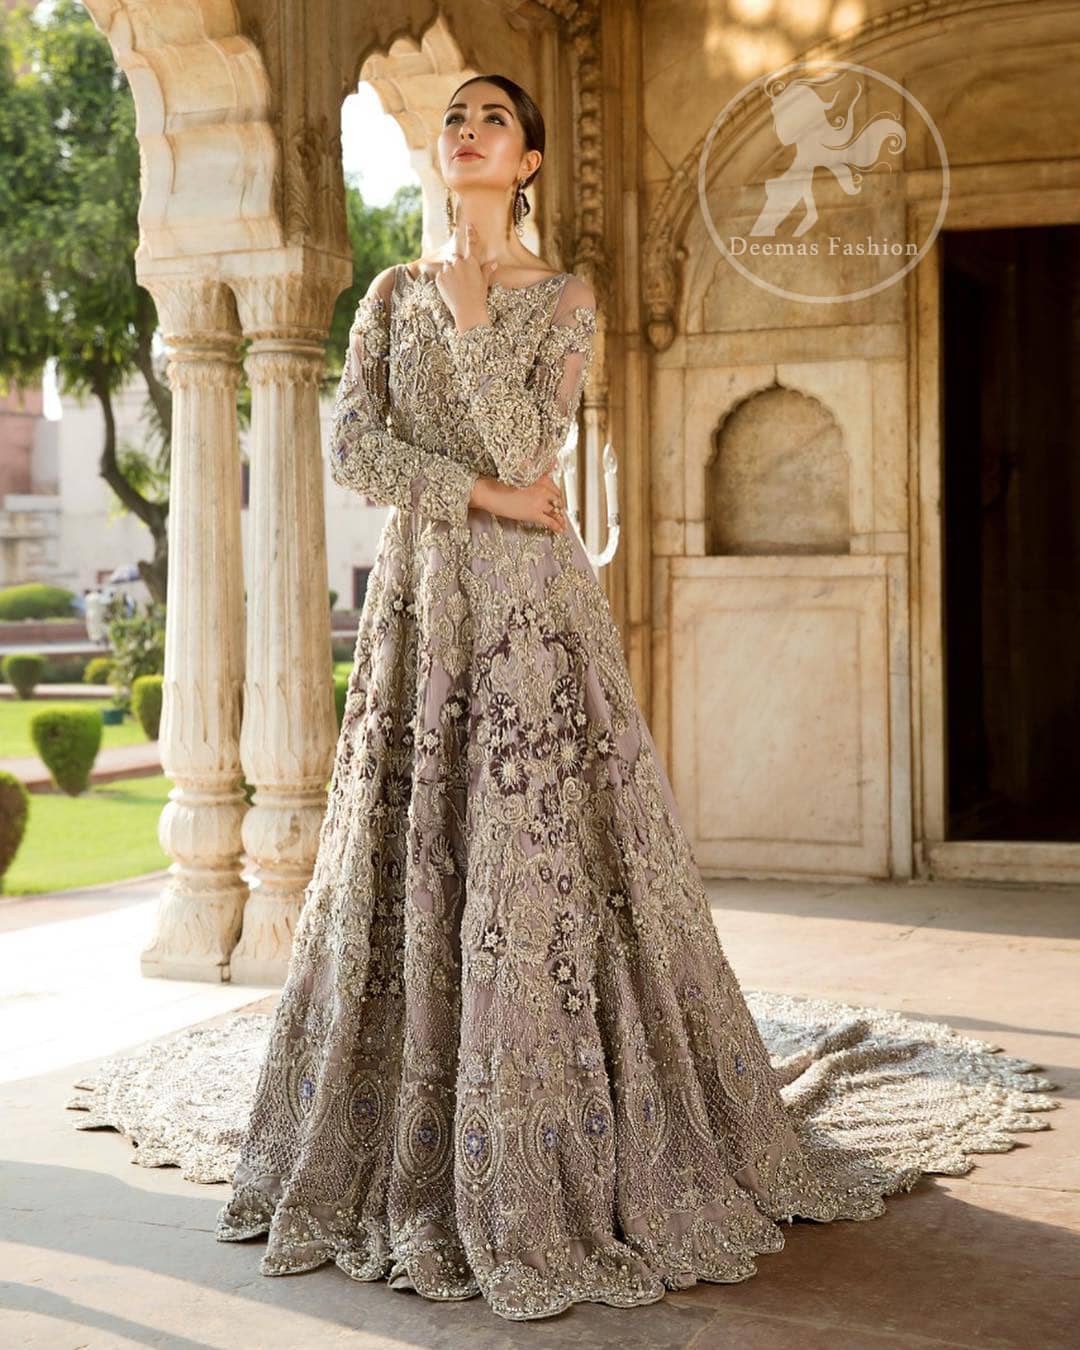 Redefine your style in this traditional and versatile ensemble ornamented with floral and geometric pattern embroidery furnished with kora, dabka, tilla, sequins, kundan, and pearls. It comes with brocade pajama. It is stunningly coordinated with Chiffon dupatta with embellished borders on all sides and sequins spray all over it.